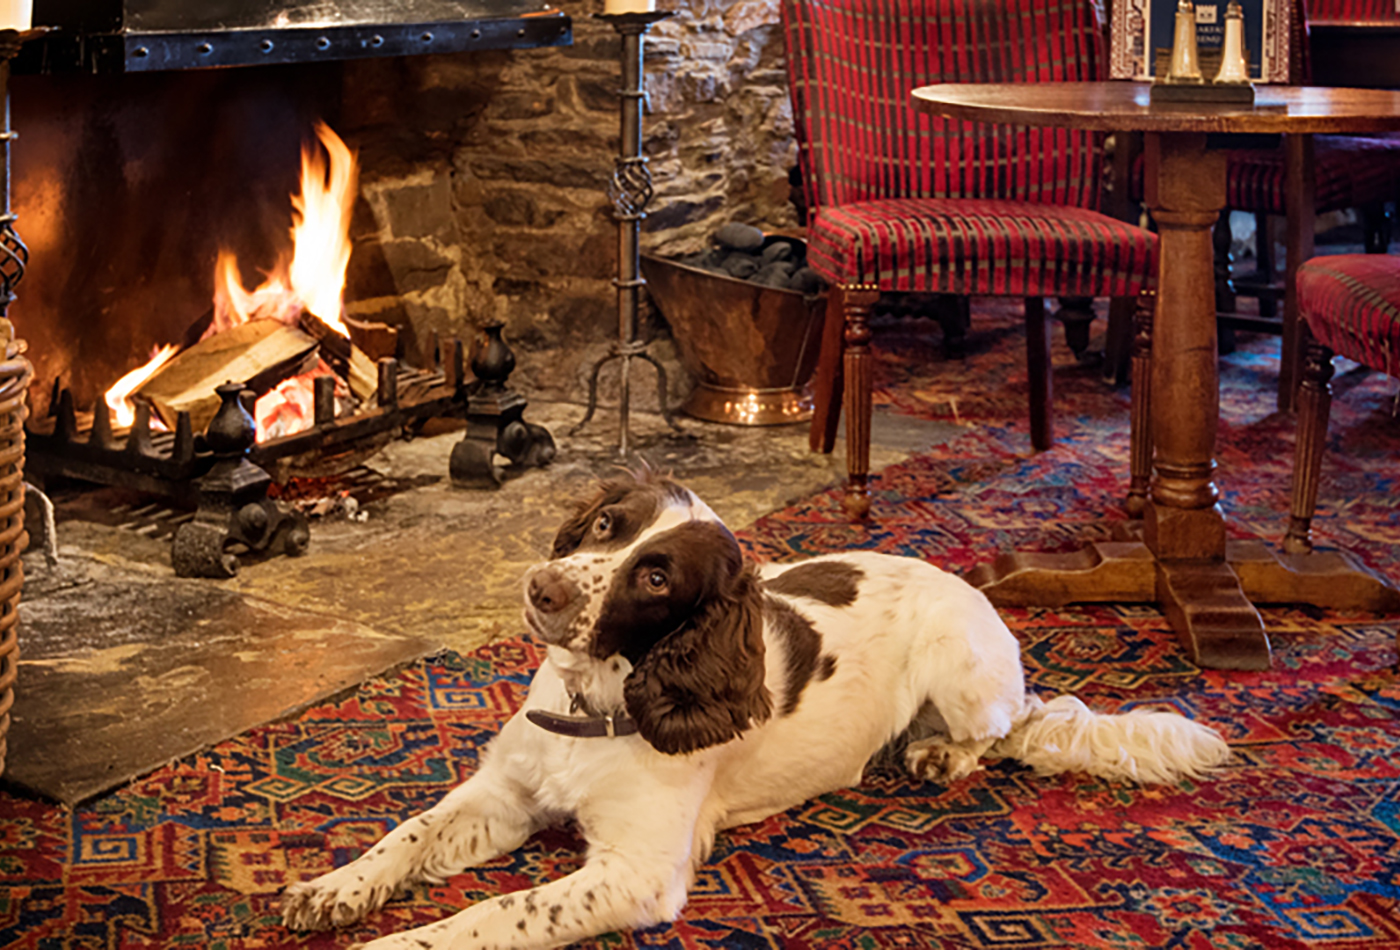 Dog friendly pubs in Dartmouth - The Royal Castle. Springer spaniel sat in front of the fire.